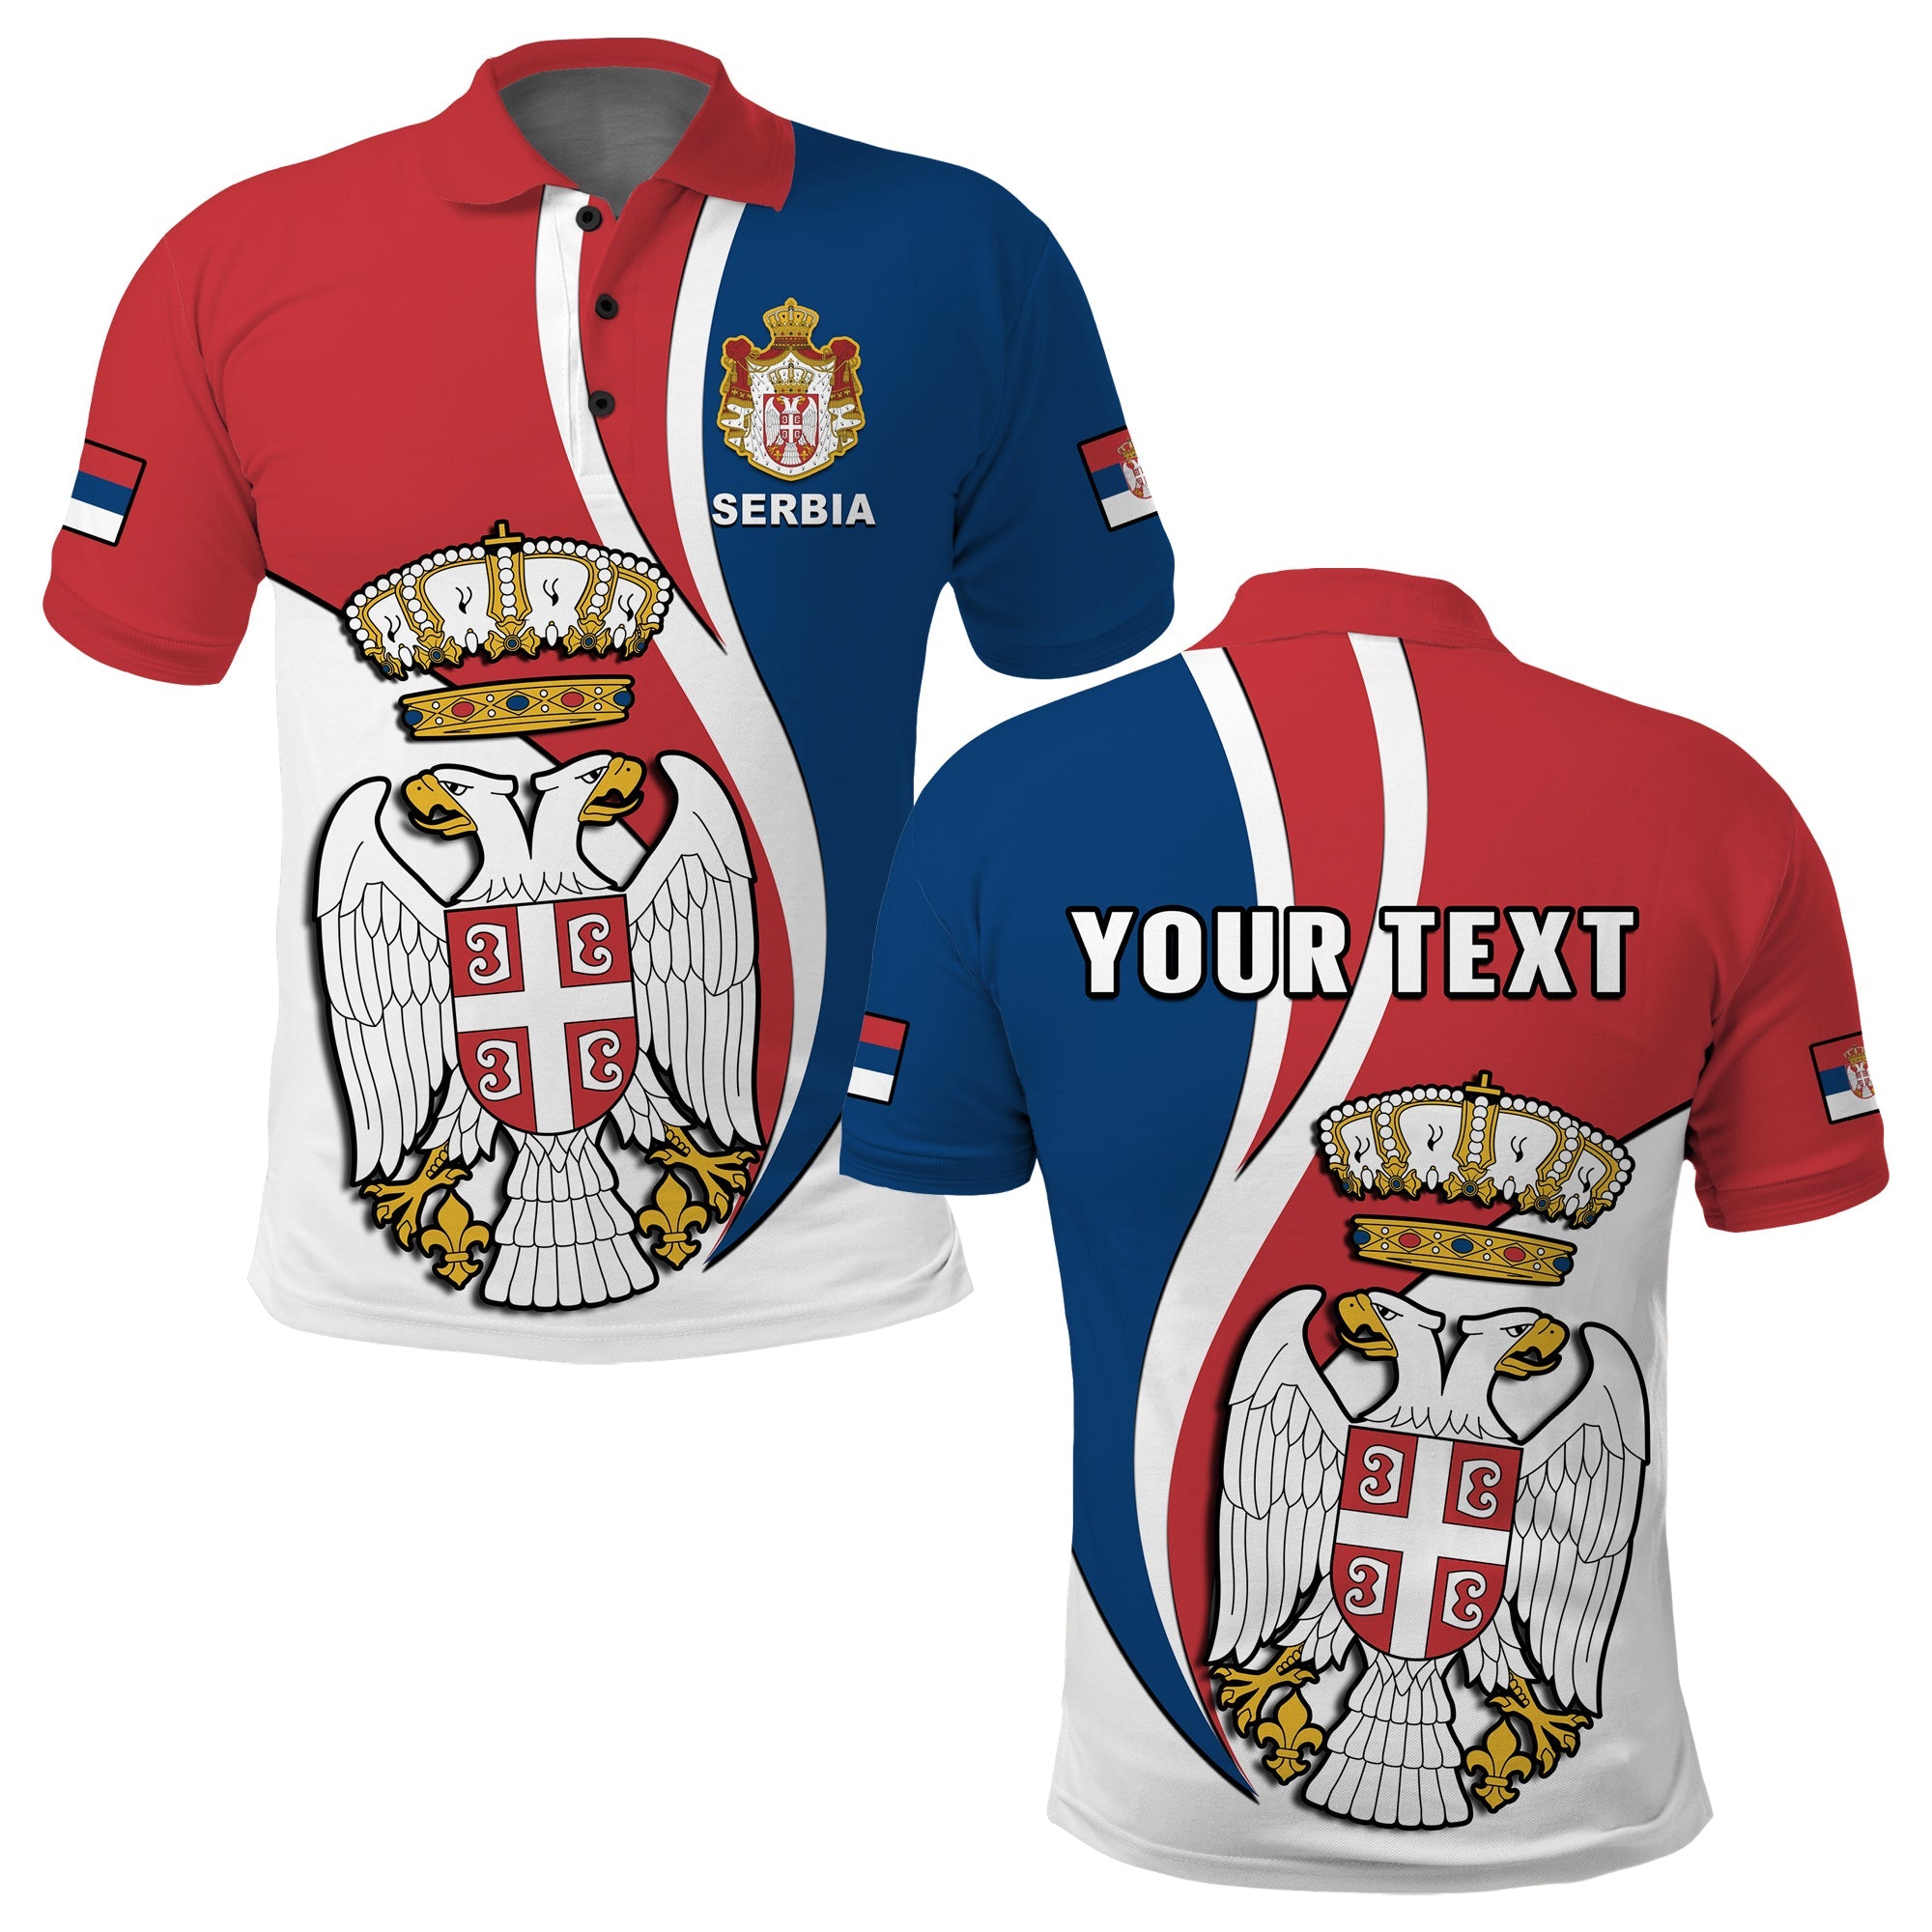 custom-personalised-serbia-polo-shirt-happy-serbian-statehood-day-with-coat-of-arms